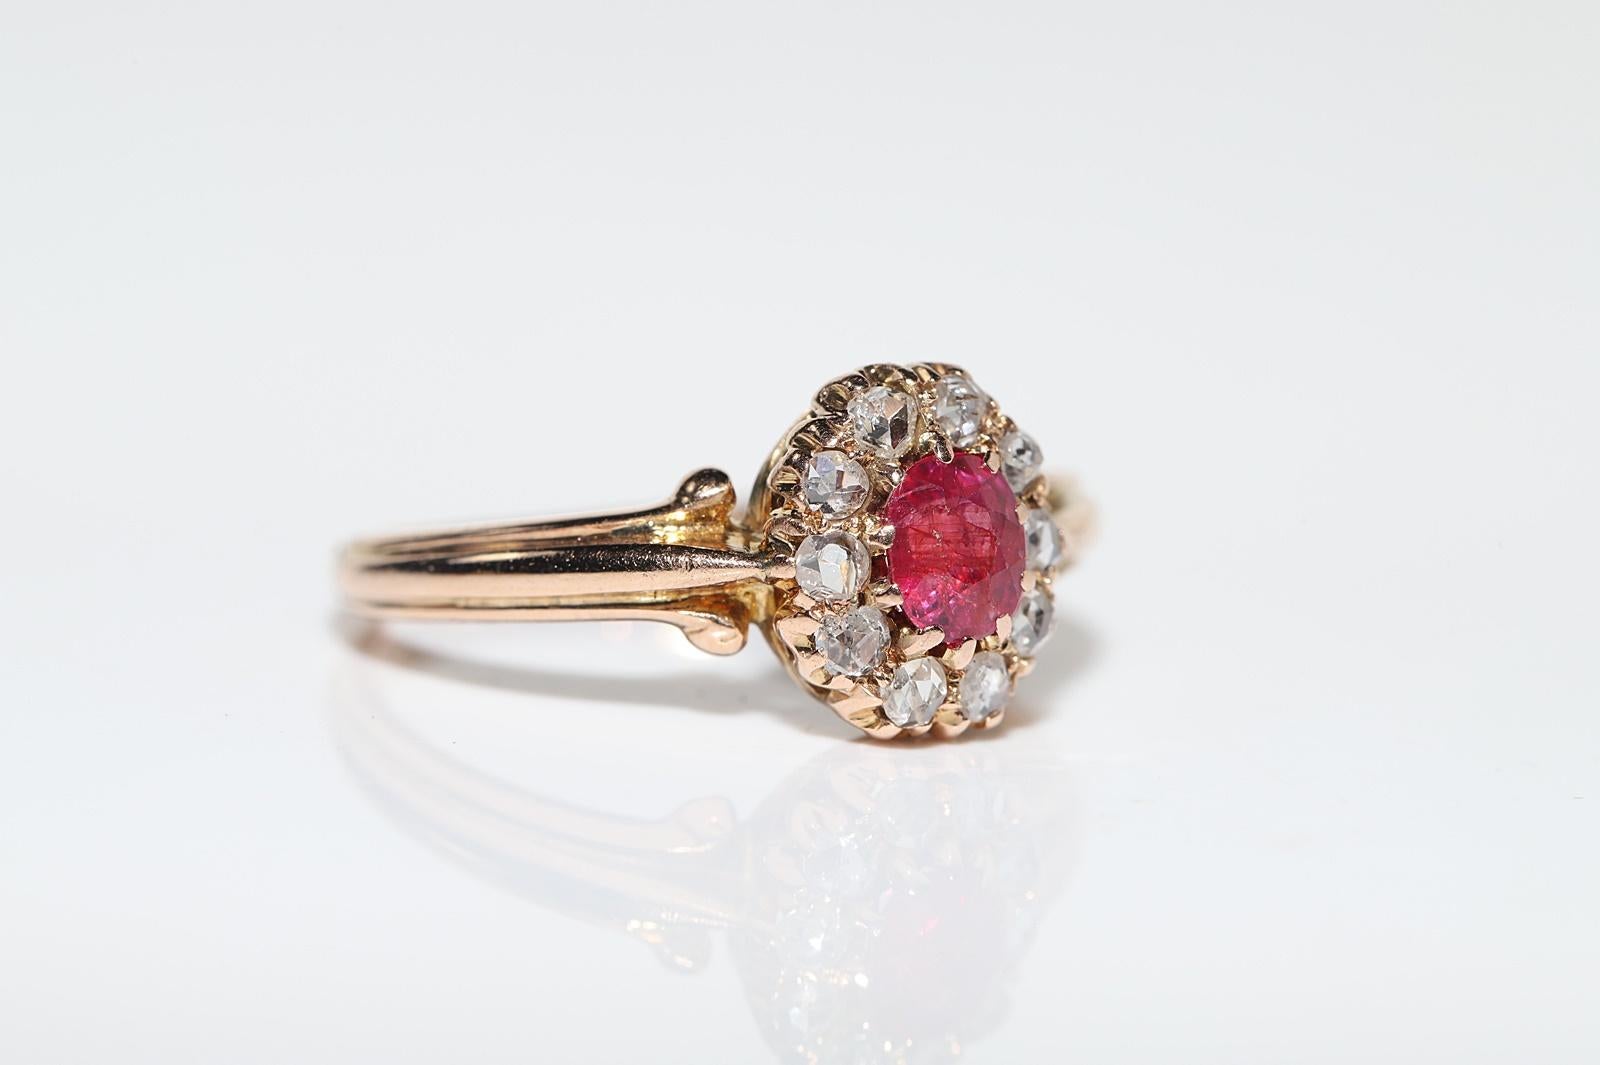 Women's Antique Circa 1900s 14k Gold Natural Rose Cut Diamond And Ruby Decorated Ring For Sale